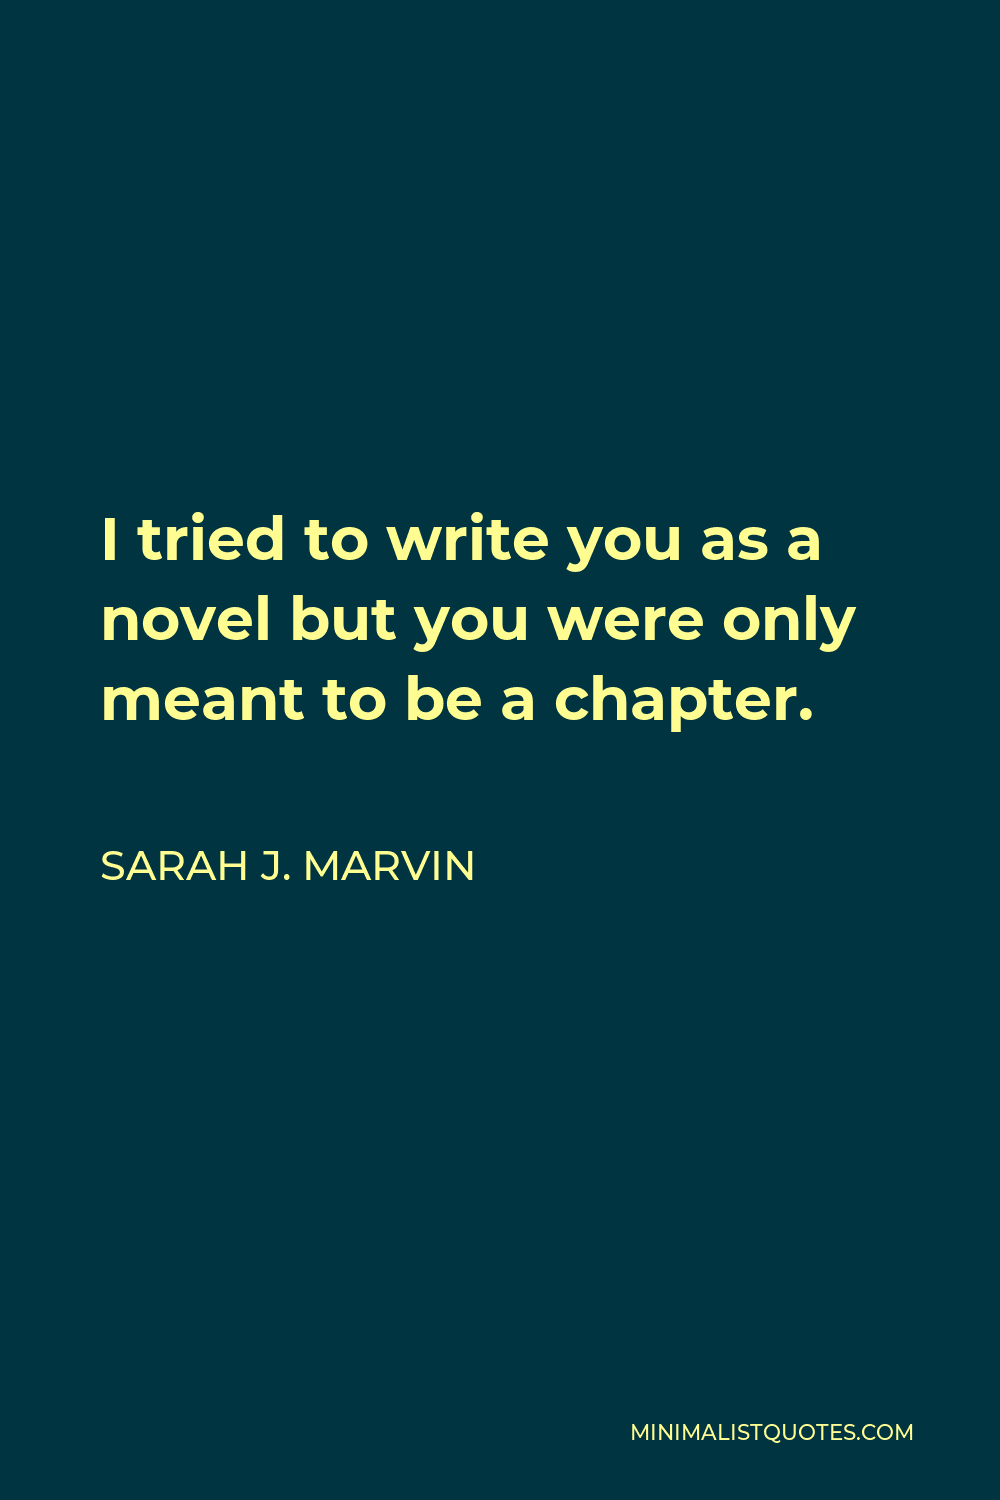 Sarah J. Marvin Quote - I tried to write you as a novel but you were only meant to be a chapter.